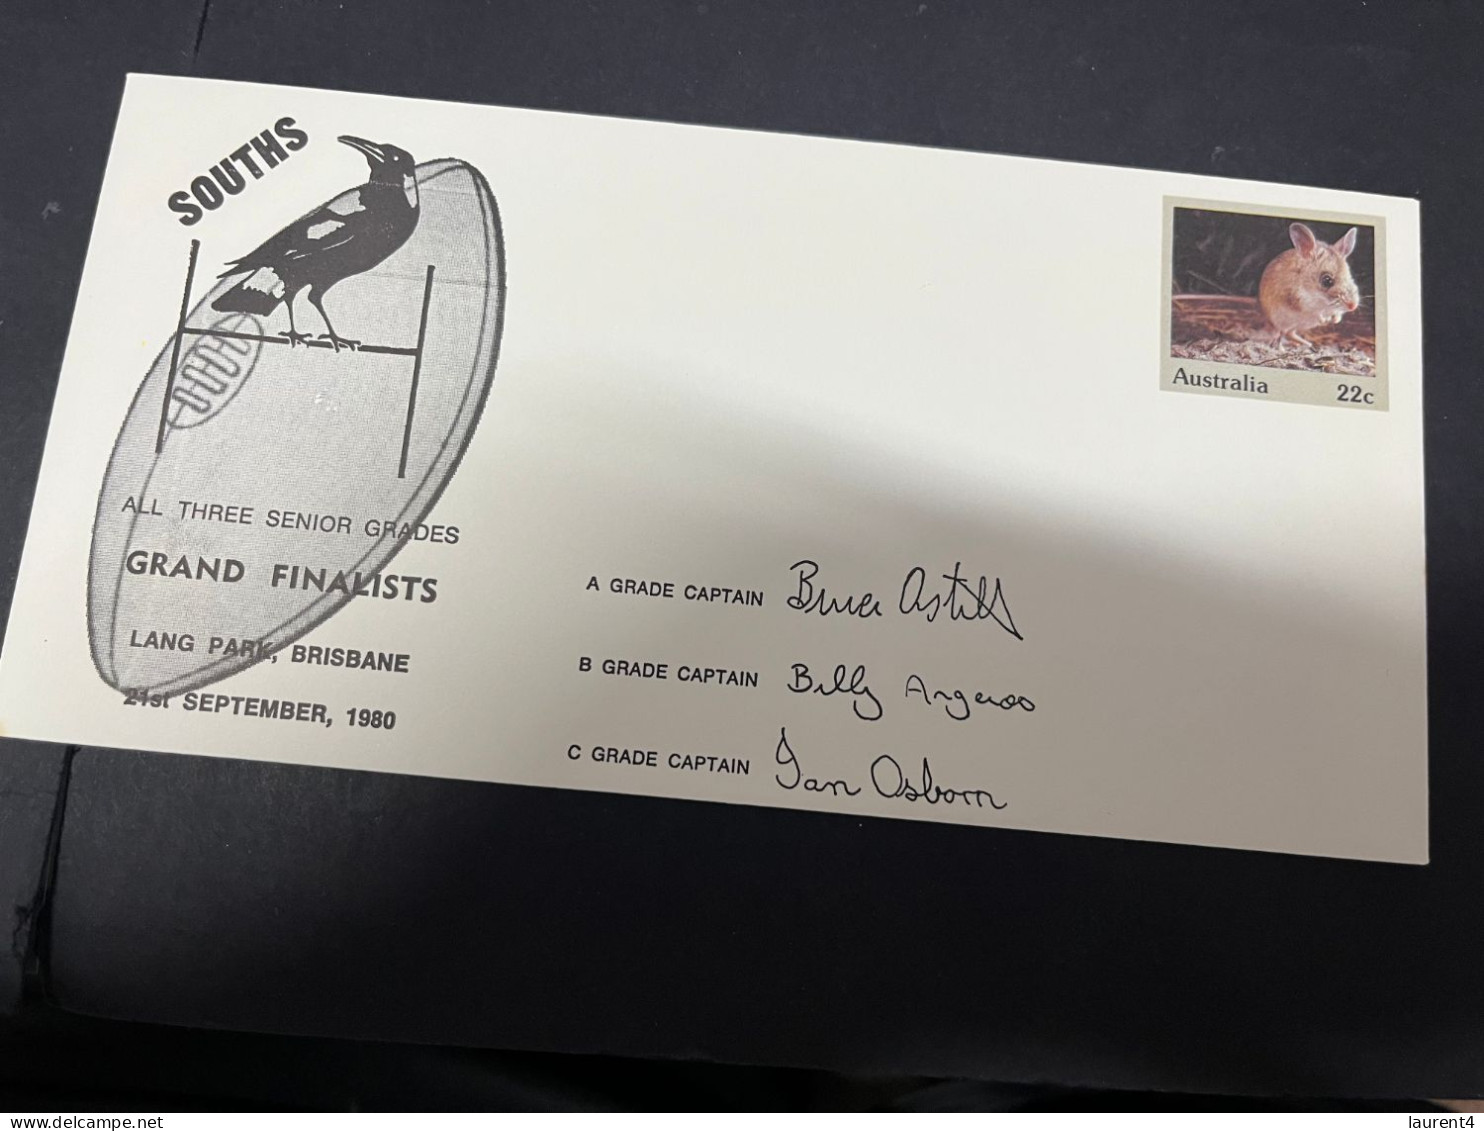 30-4-2023 (3 Z 29) Australia FDC (1 Covers) 1980 - OZ Football - South (magpies) Grand Finalists (signed - Hoping Mouse) - Primo Giorno D'emissione (FDC)